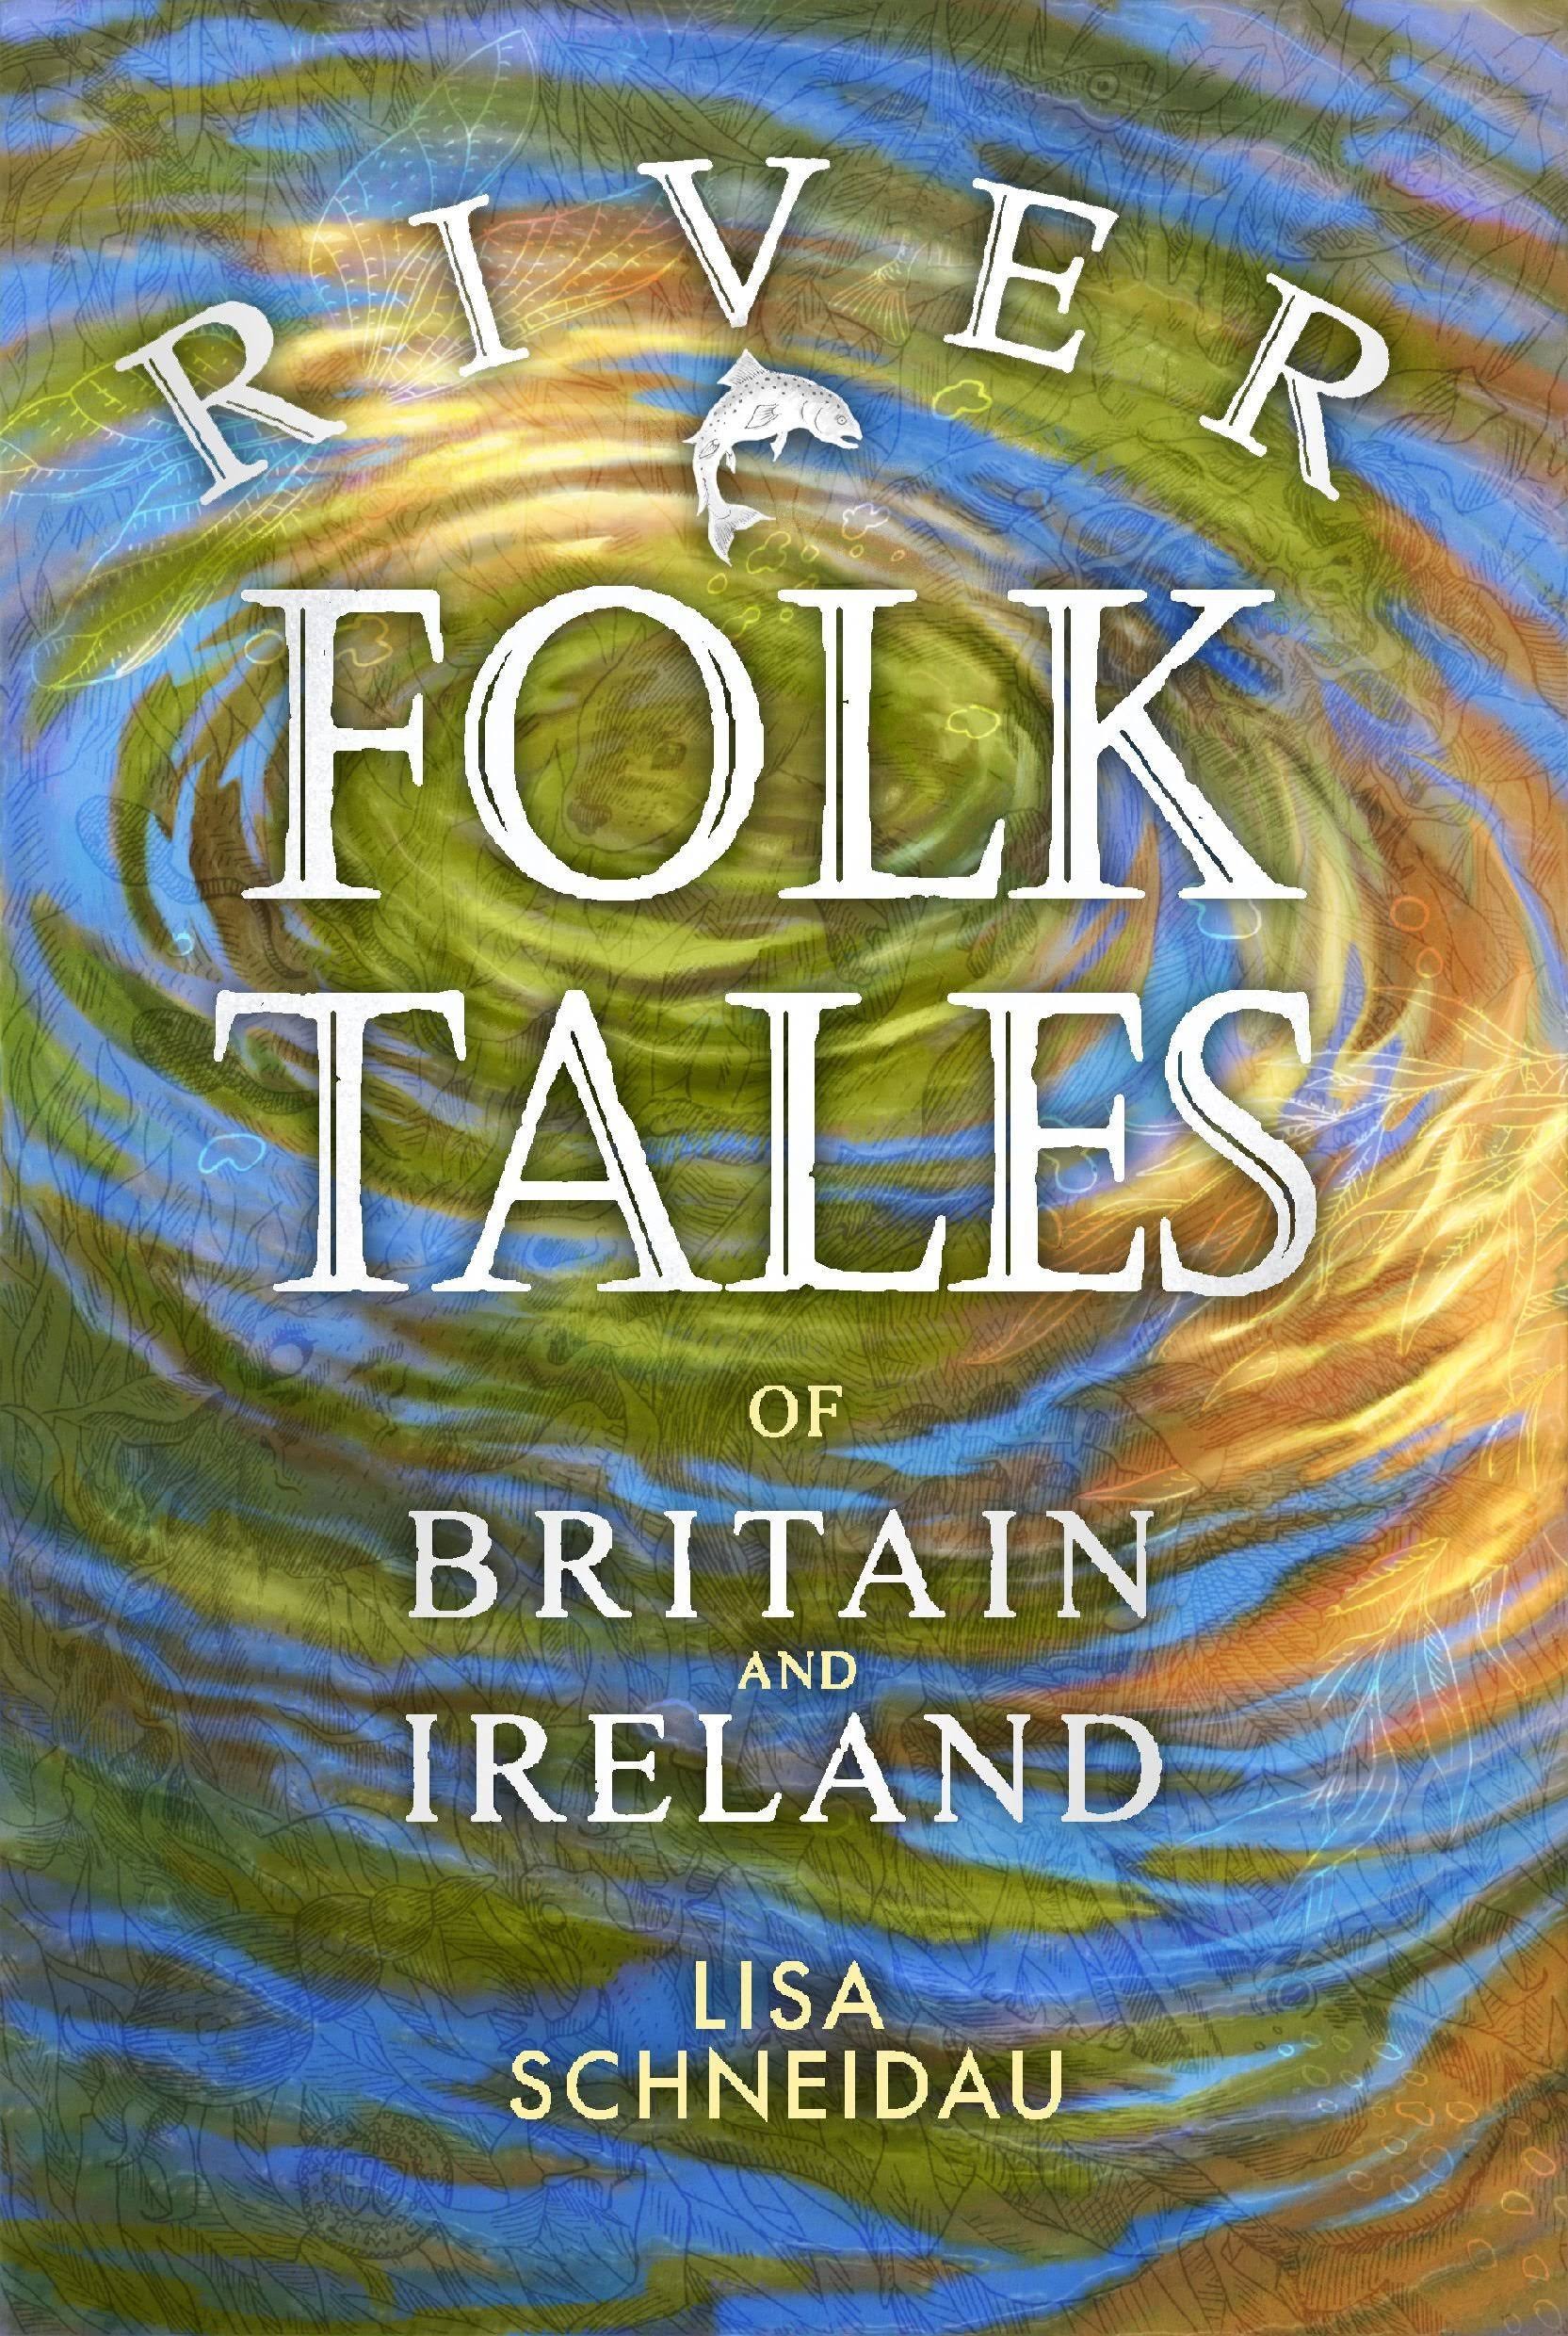 River Folk Tales of Britain and Ireland [Book]